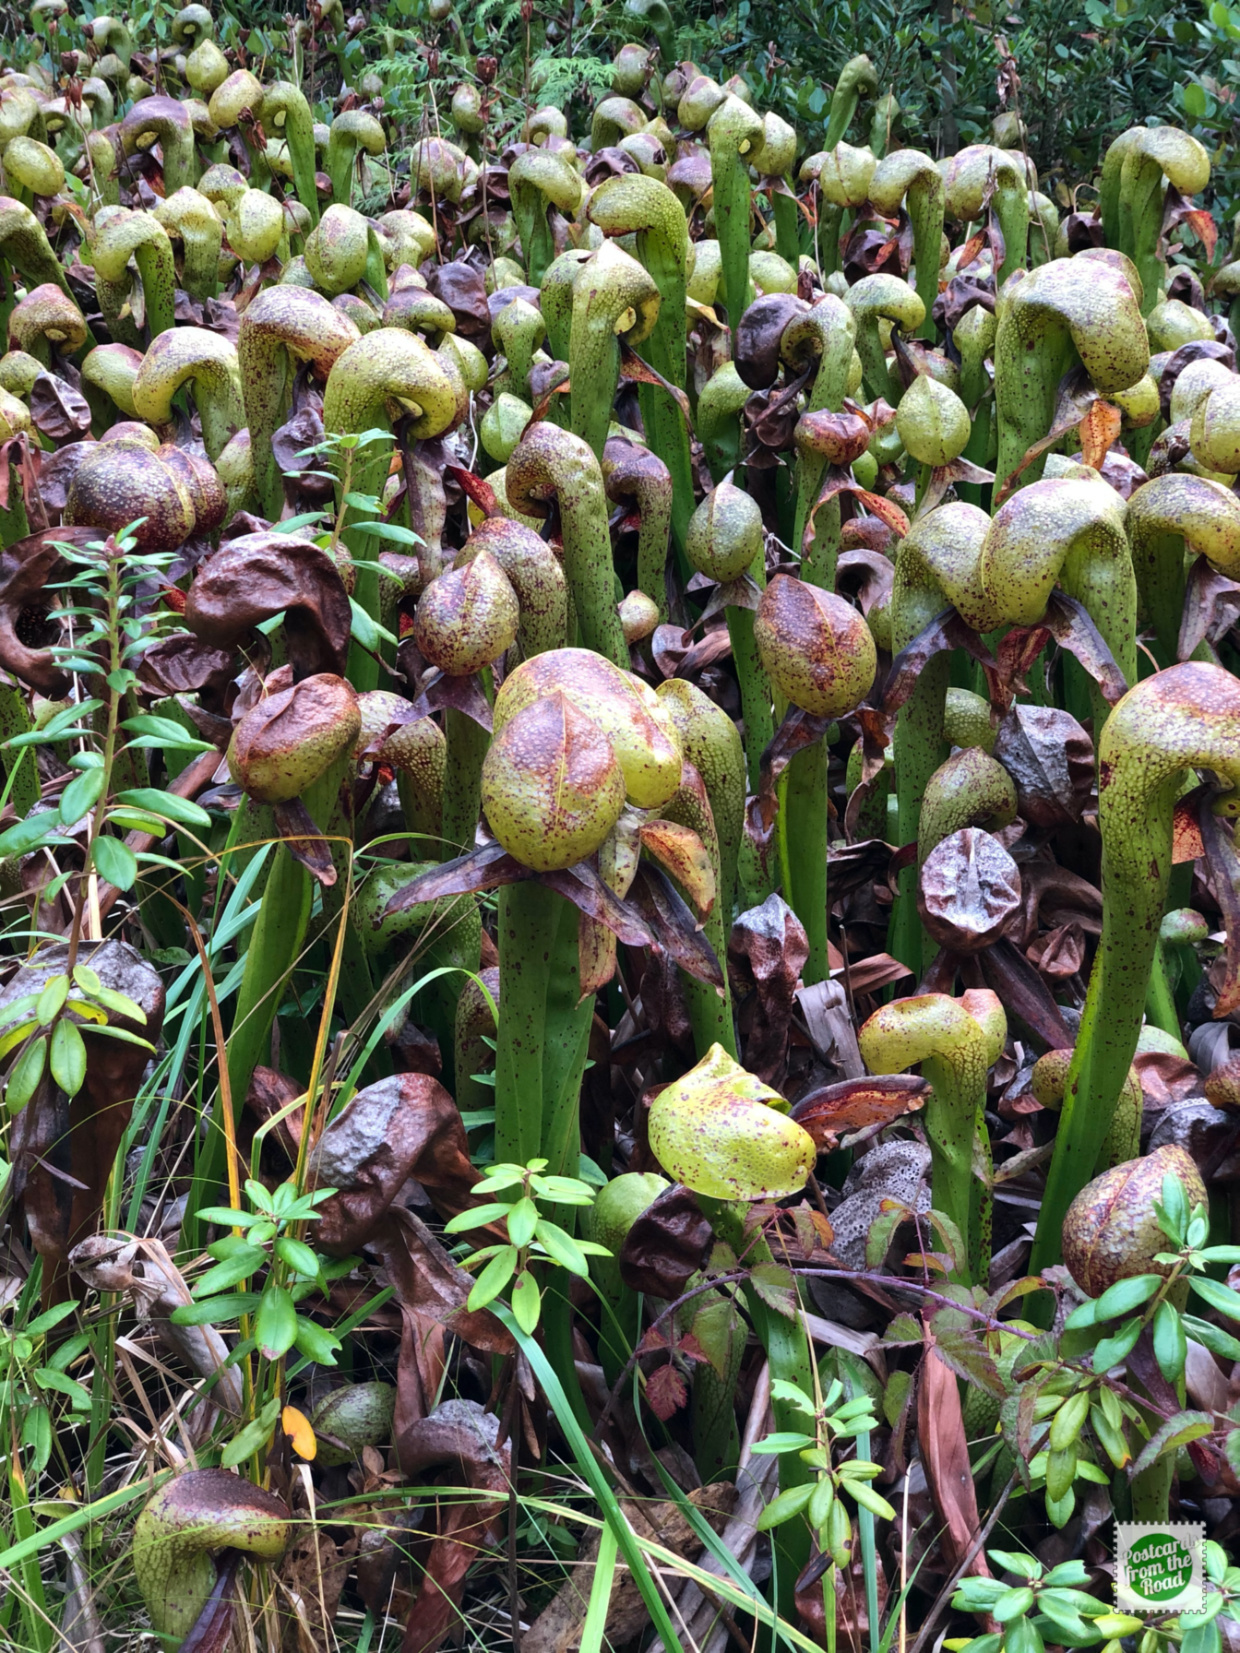 Darlingtonia californica, a carnivorous plant, is native to Northern California and Oregon growing in bogs and seeps with cold running water.